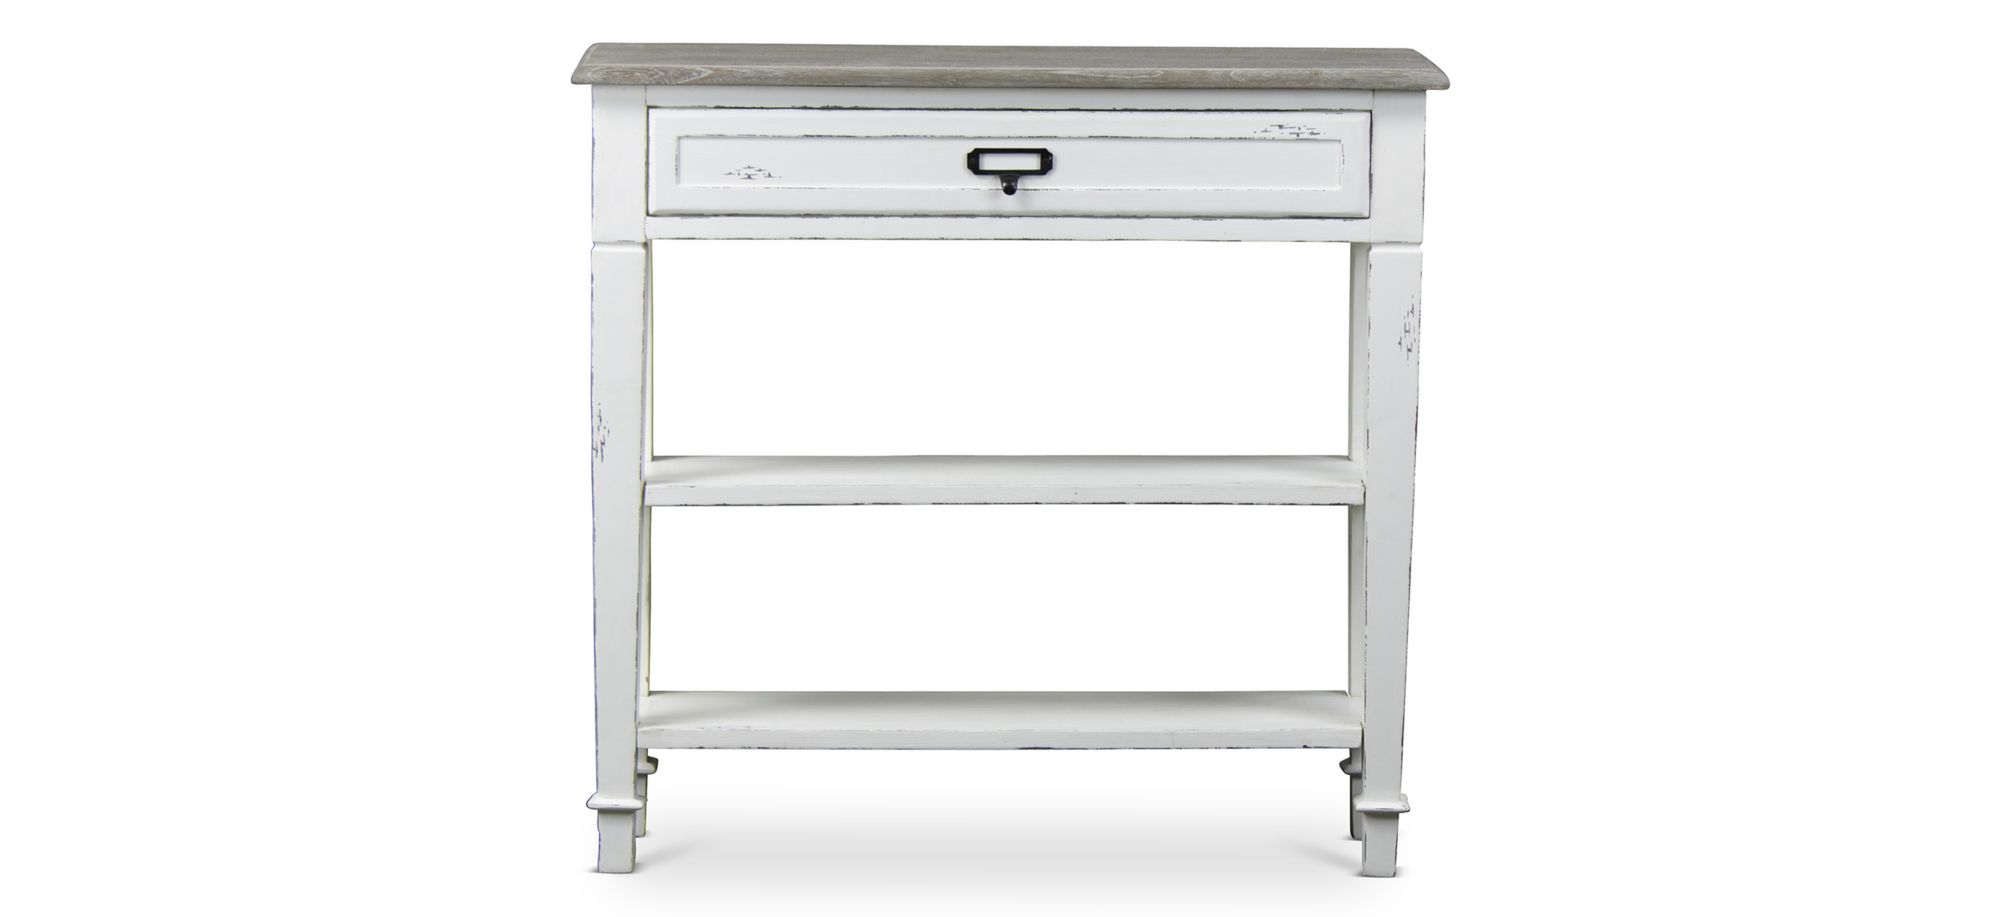 Dauphine Console Table-1 Drawer in White/Light Brown by Wholesale Interiors